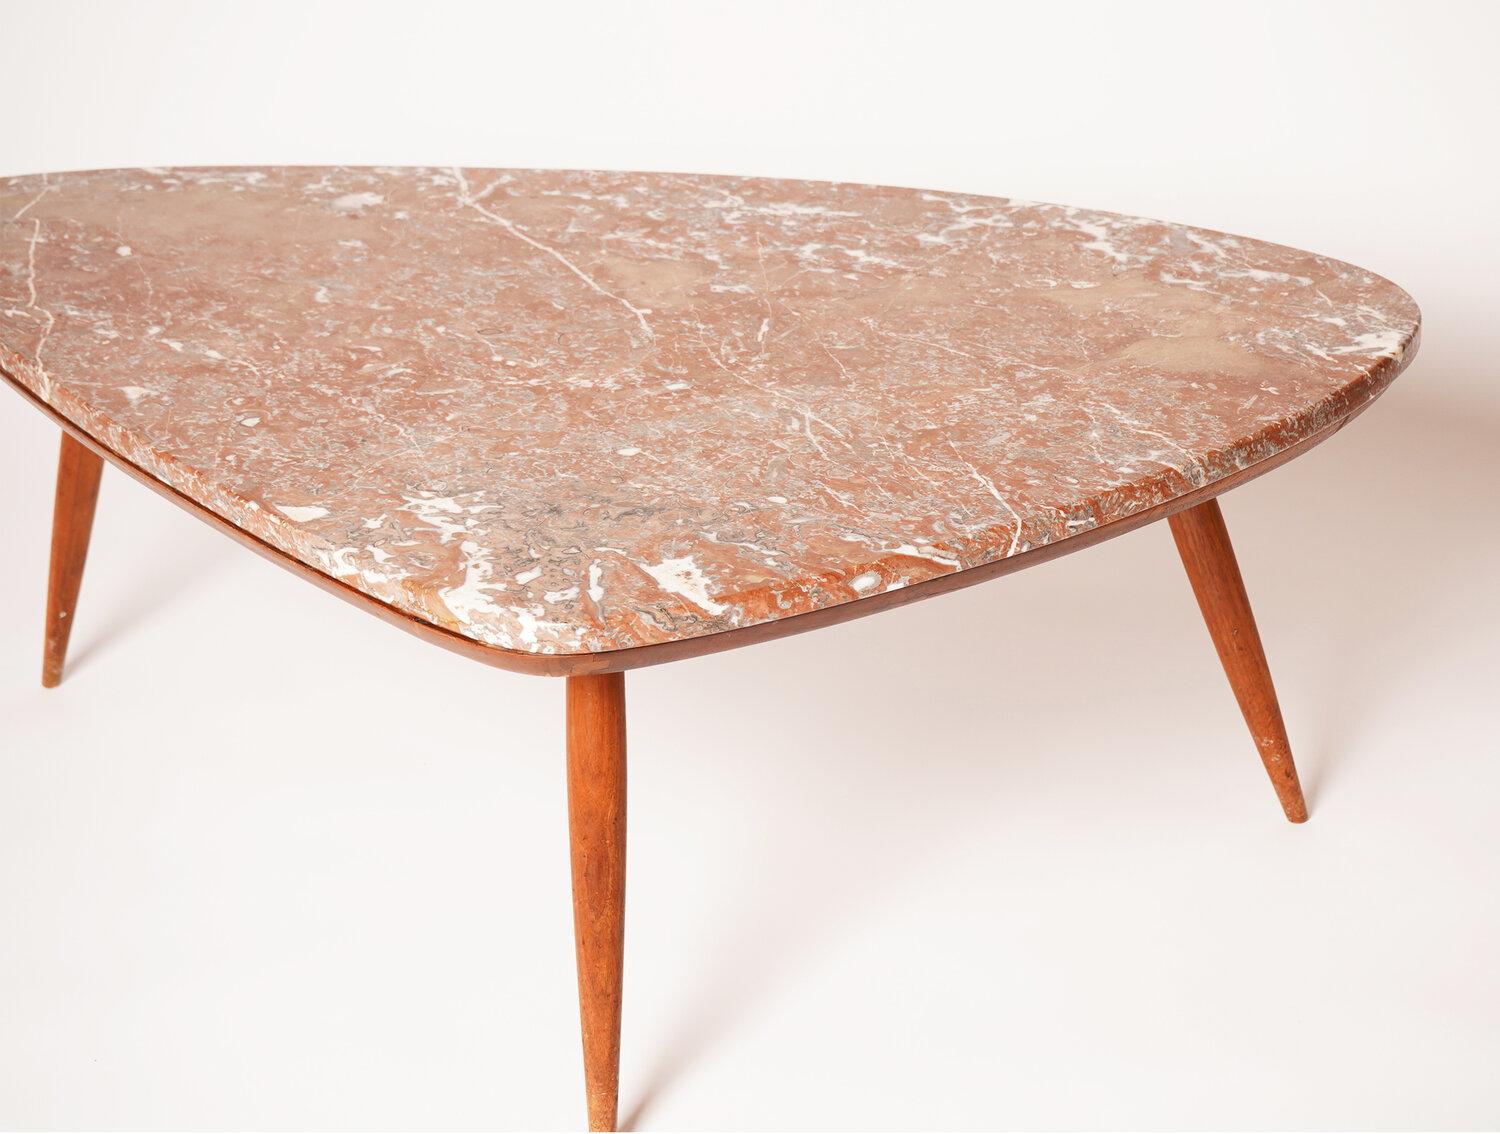 This Phillip Lloyd Powell marble coffee table features clean lines and a unique warm tone marble top. Born in Pennsylvania, Powell was known for his elegant and sculptural pieces. This table with a marble top is harder to find compared to his all